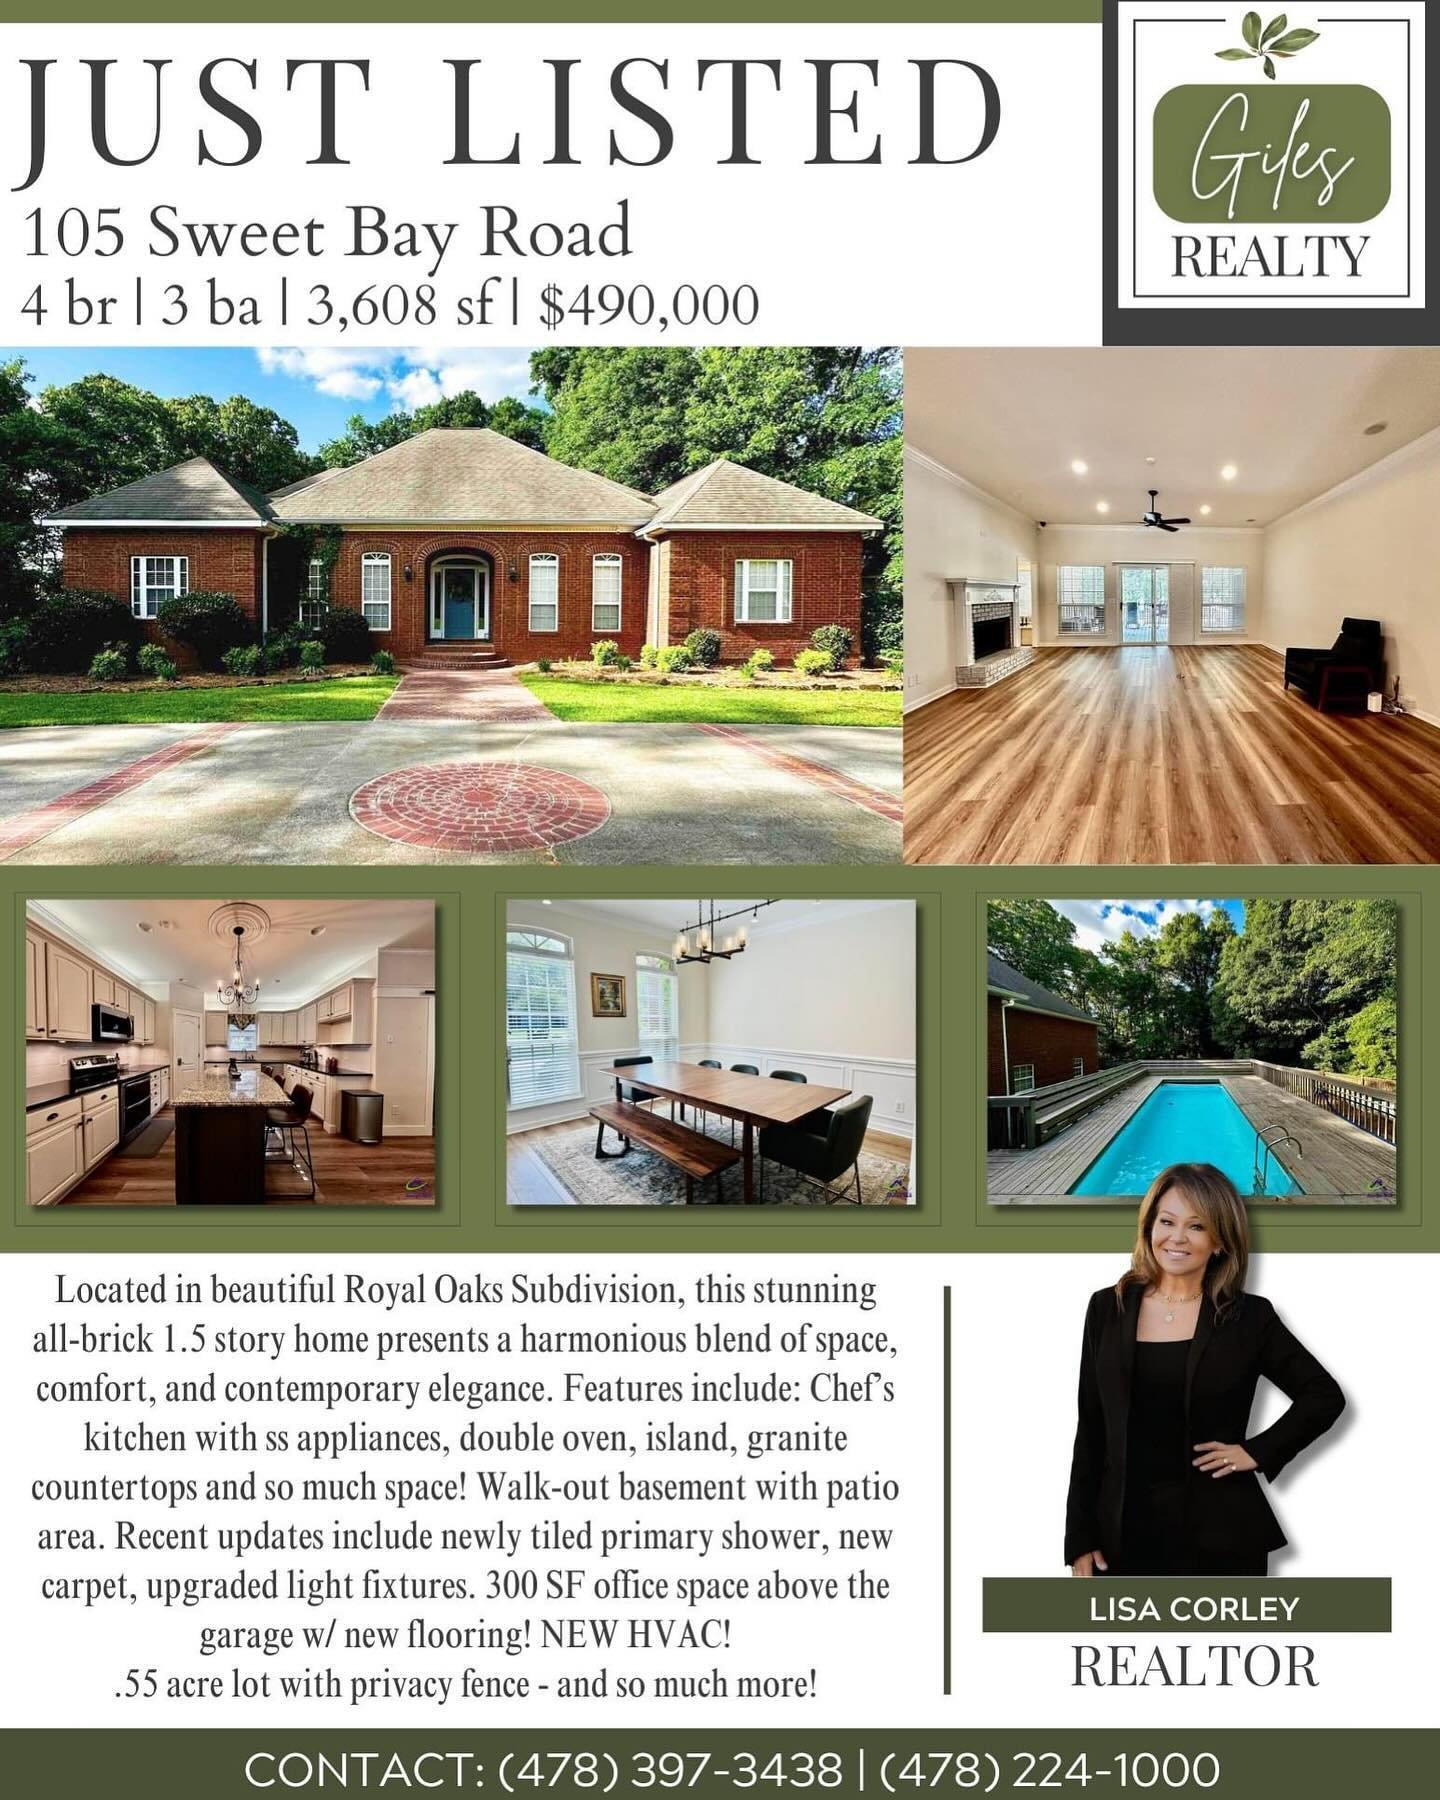 🏡 Welcome Home to 105 Sweet Bay Road! 🏡

Located in beautiful Royal Oaks Subdivision, this home sits on a .55-acre lot enveloped by wooded privacy, an additional wired shop, circular driveway and long side driveway. 

Features include:
✅3,608 sf of